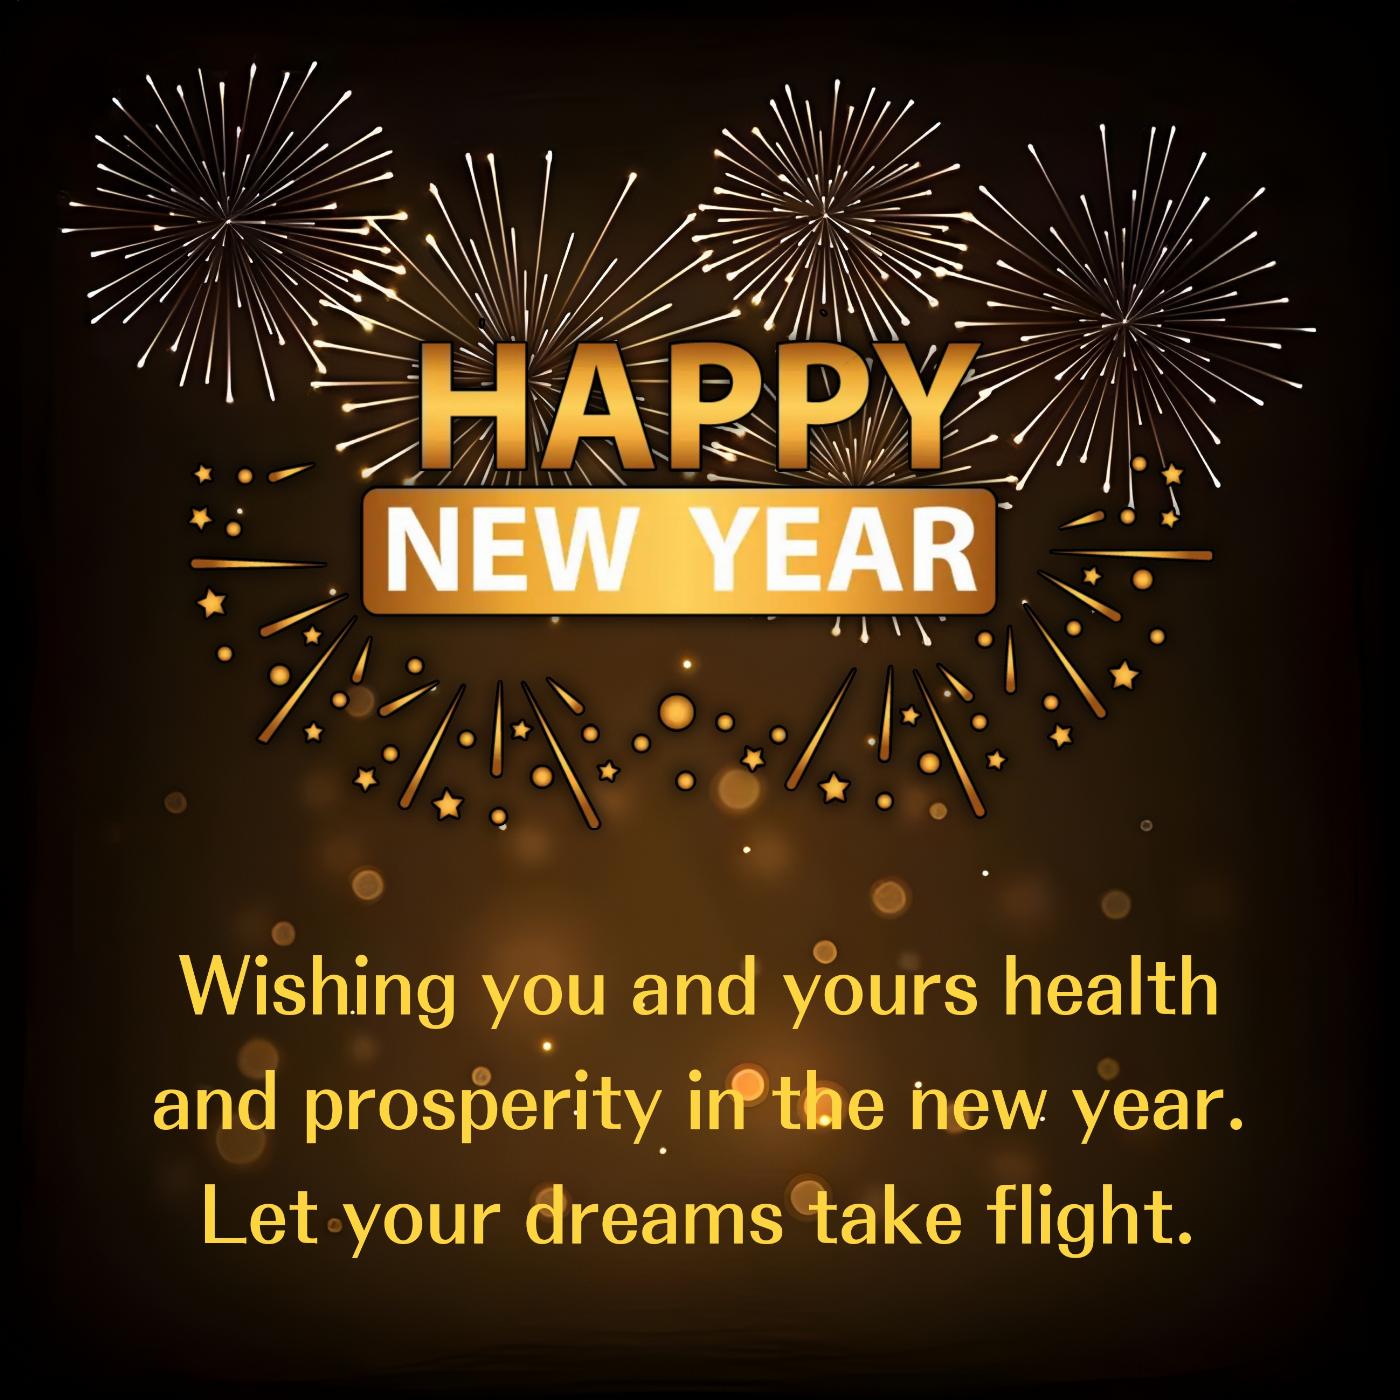 Wishing you and yours health and prosperity in the new year